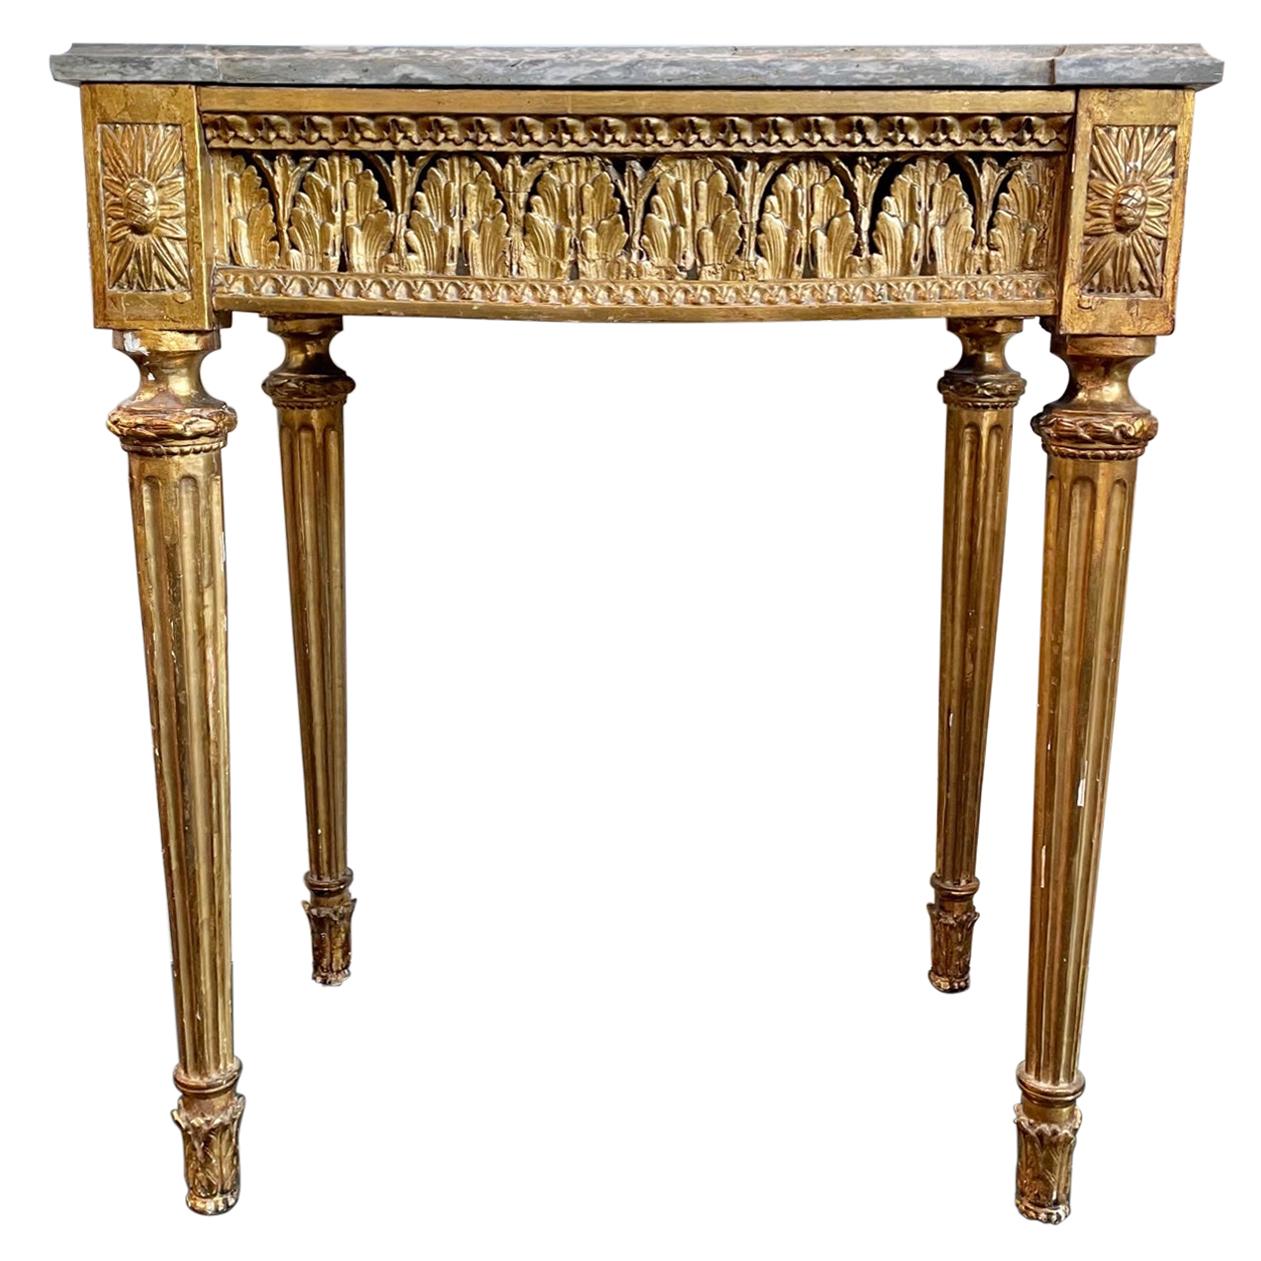 Giltwood Louis XVI Style Console Table with Marble Top, Neoclassical